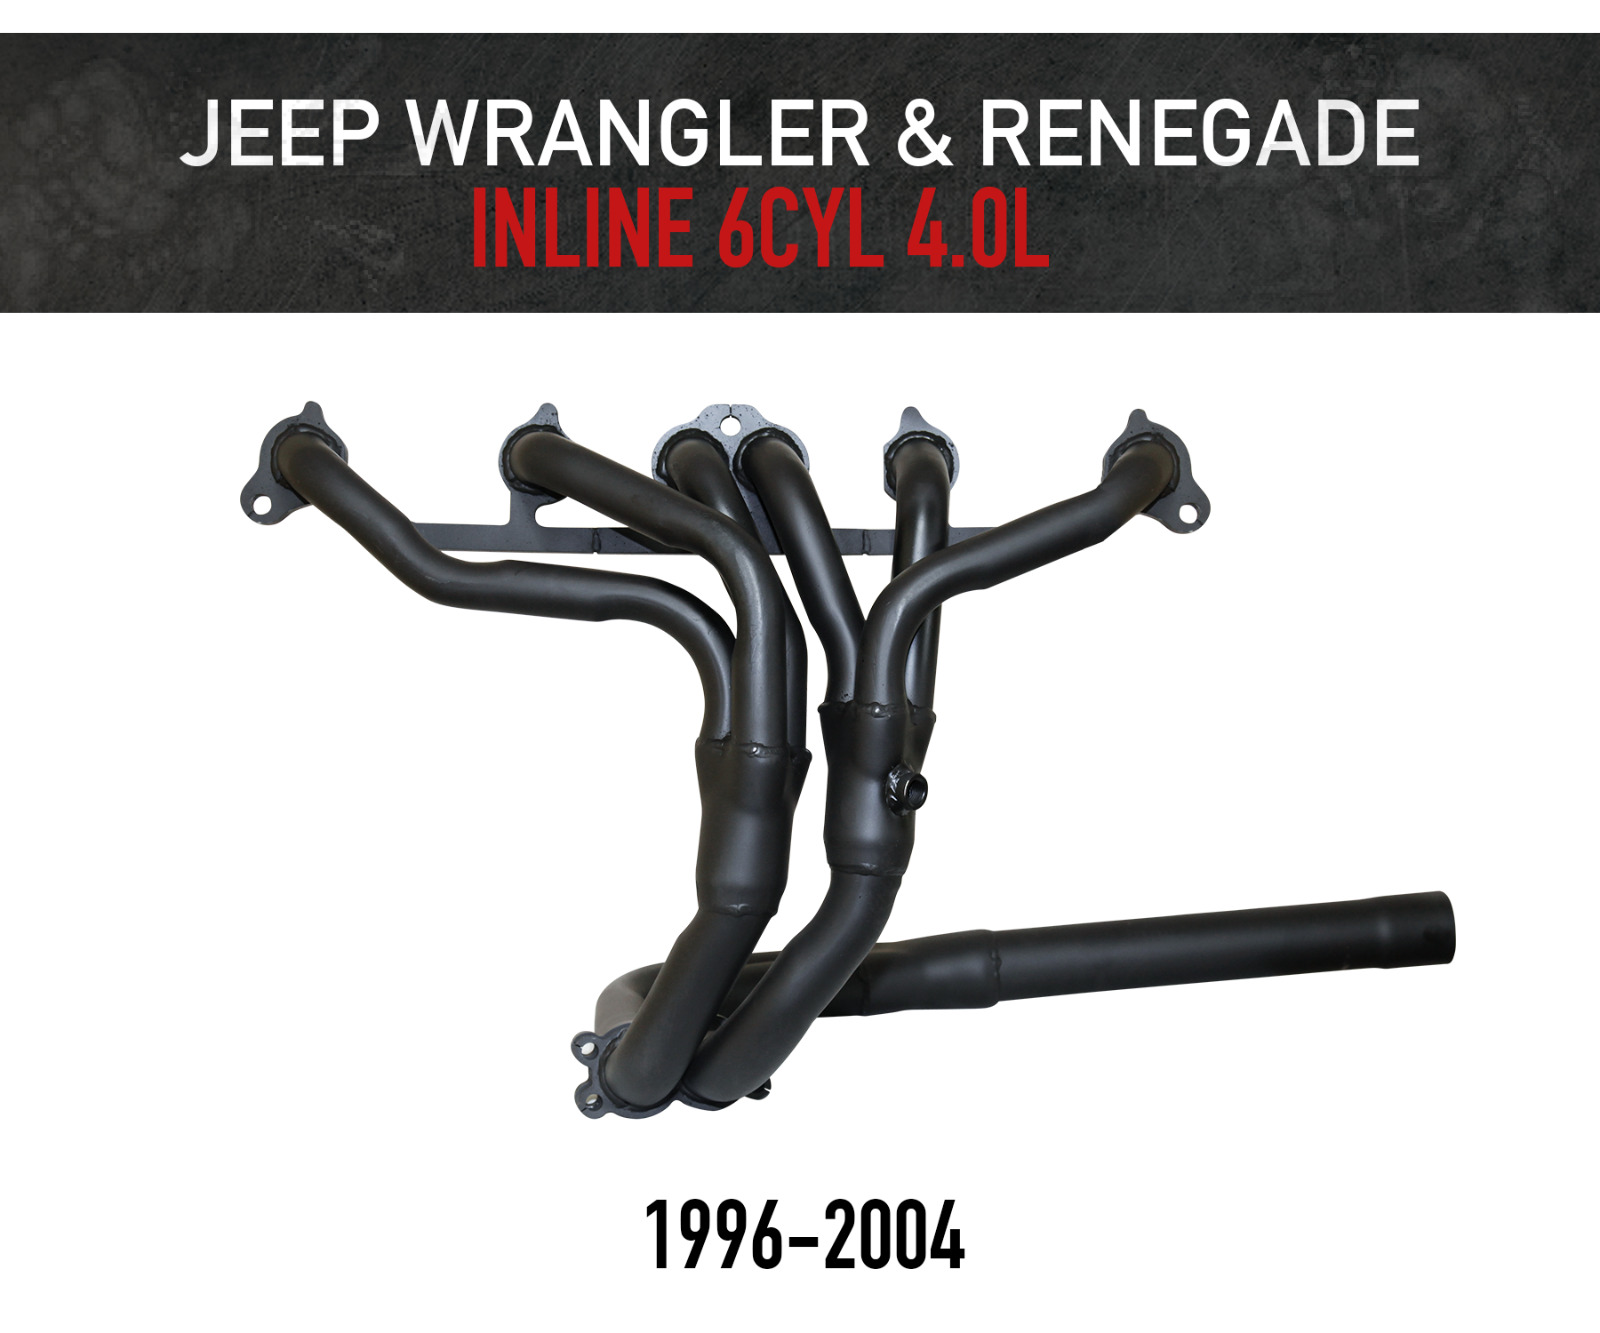  Headers / Extractors for Jeep Wrangler & Renegade (1996-2004) 4.0L 6cyl